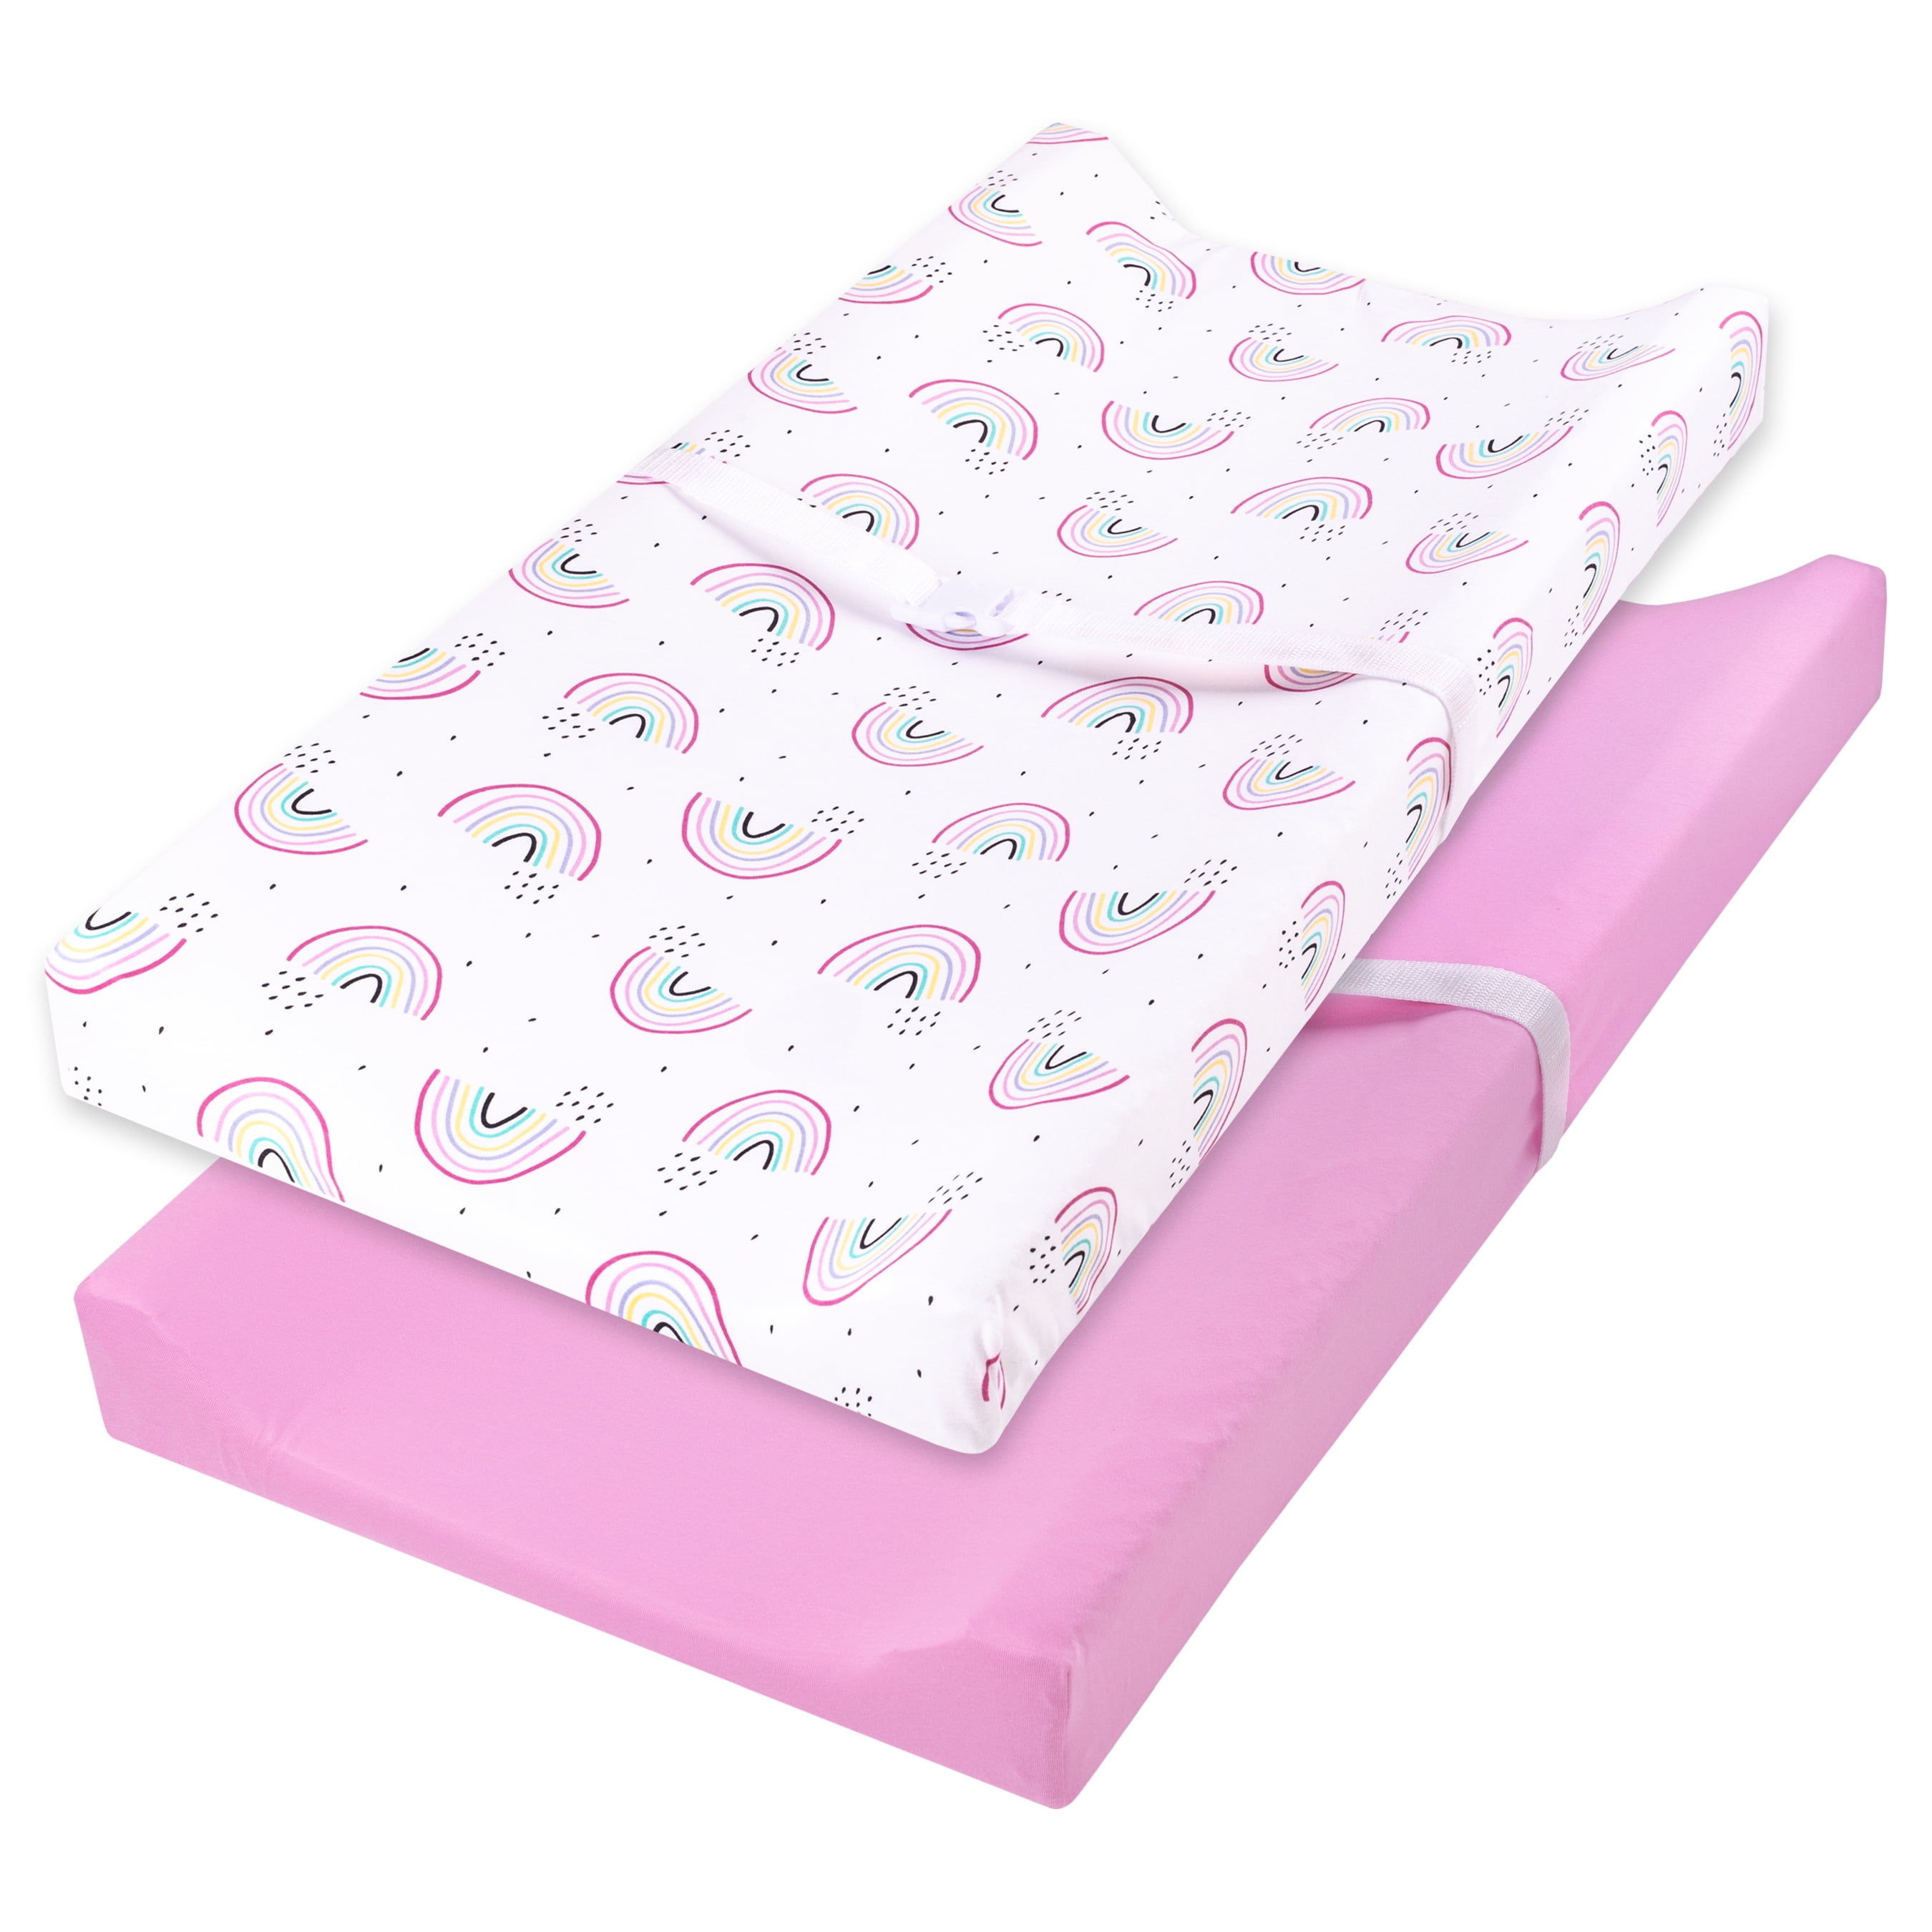 Boritar Changing Pad Covers Dotted Design with Pink Unicorn Print Super Comfy 